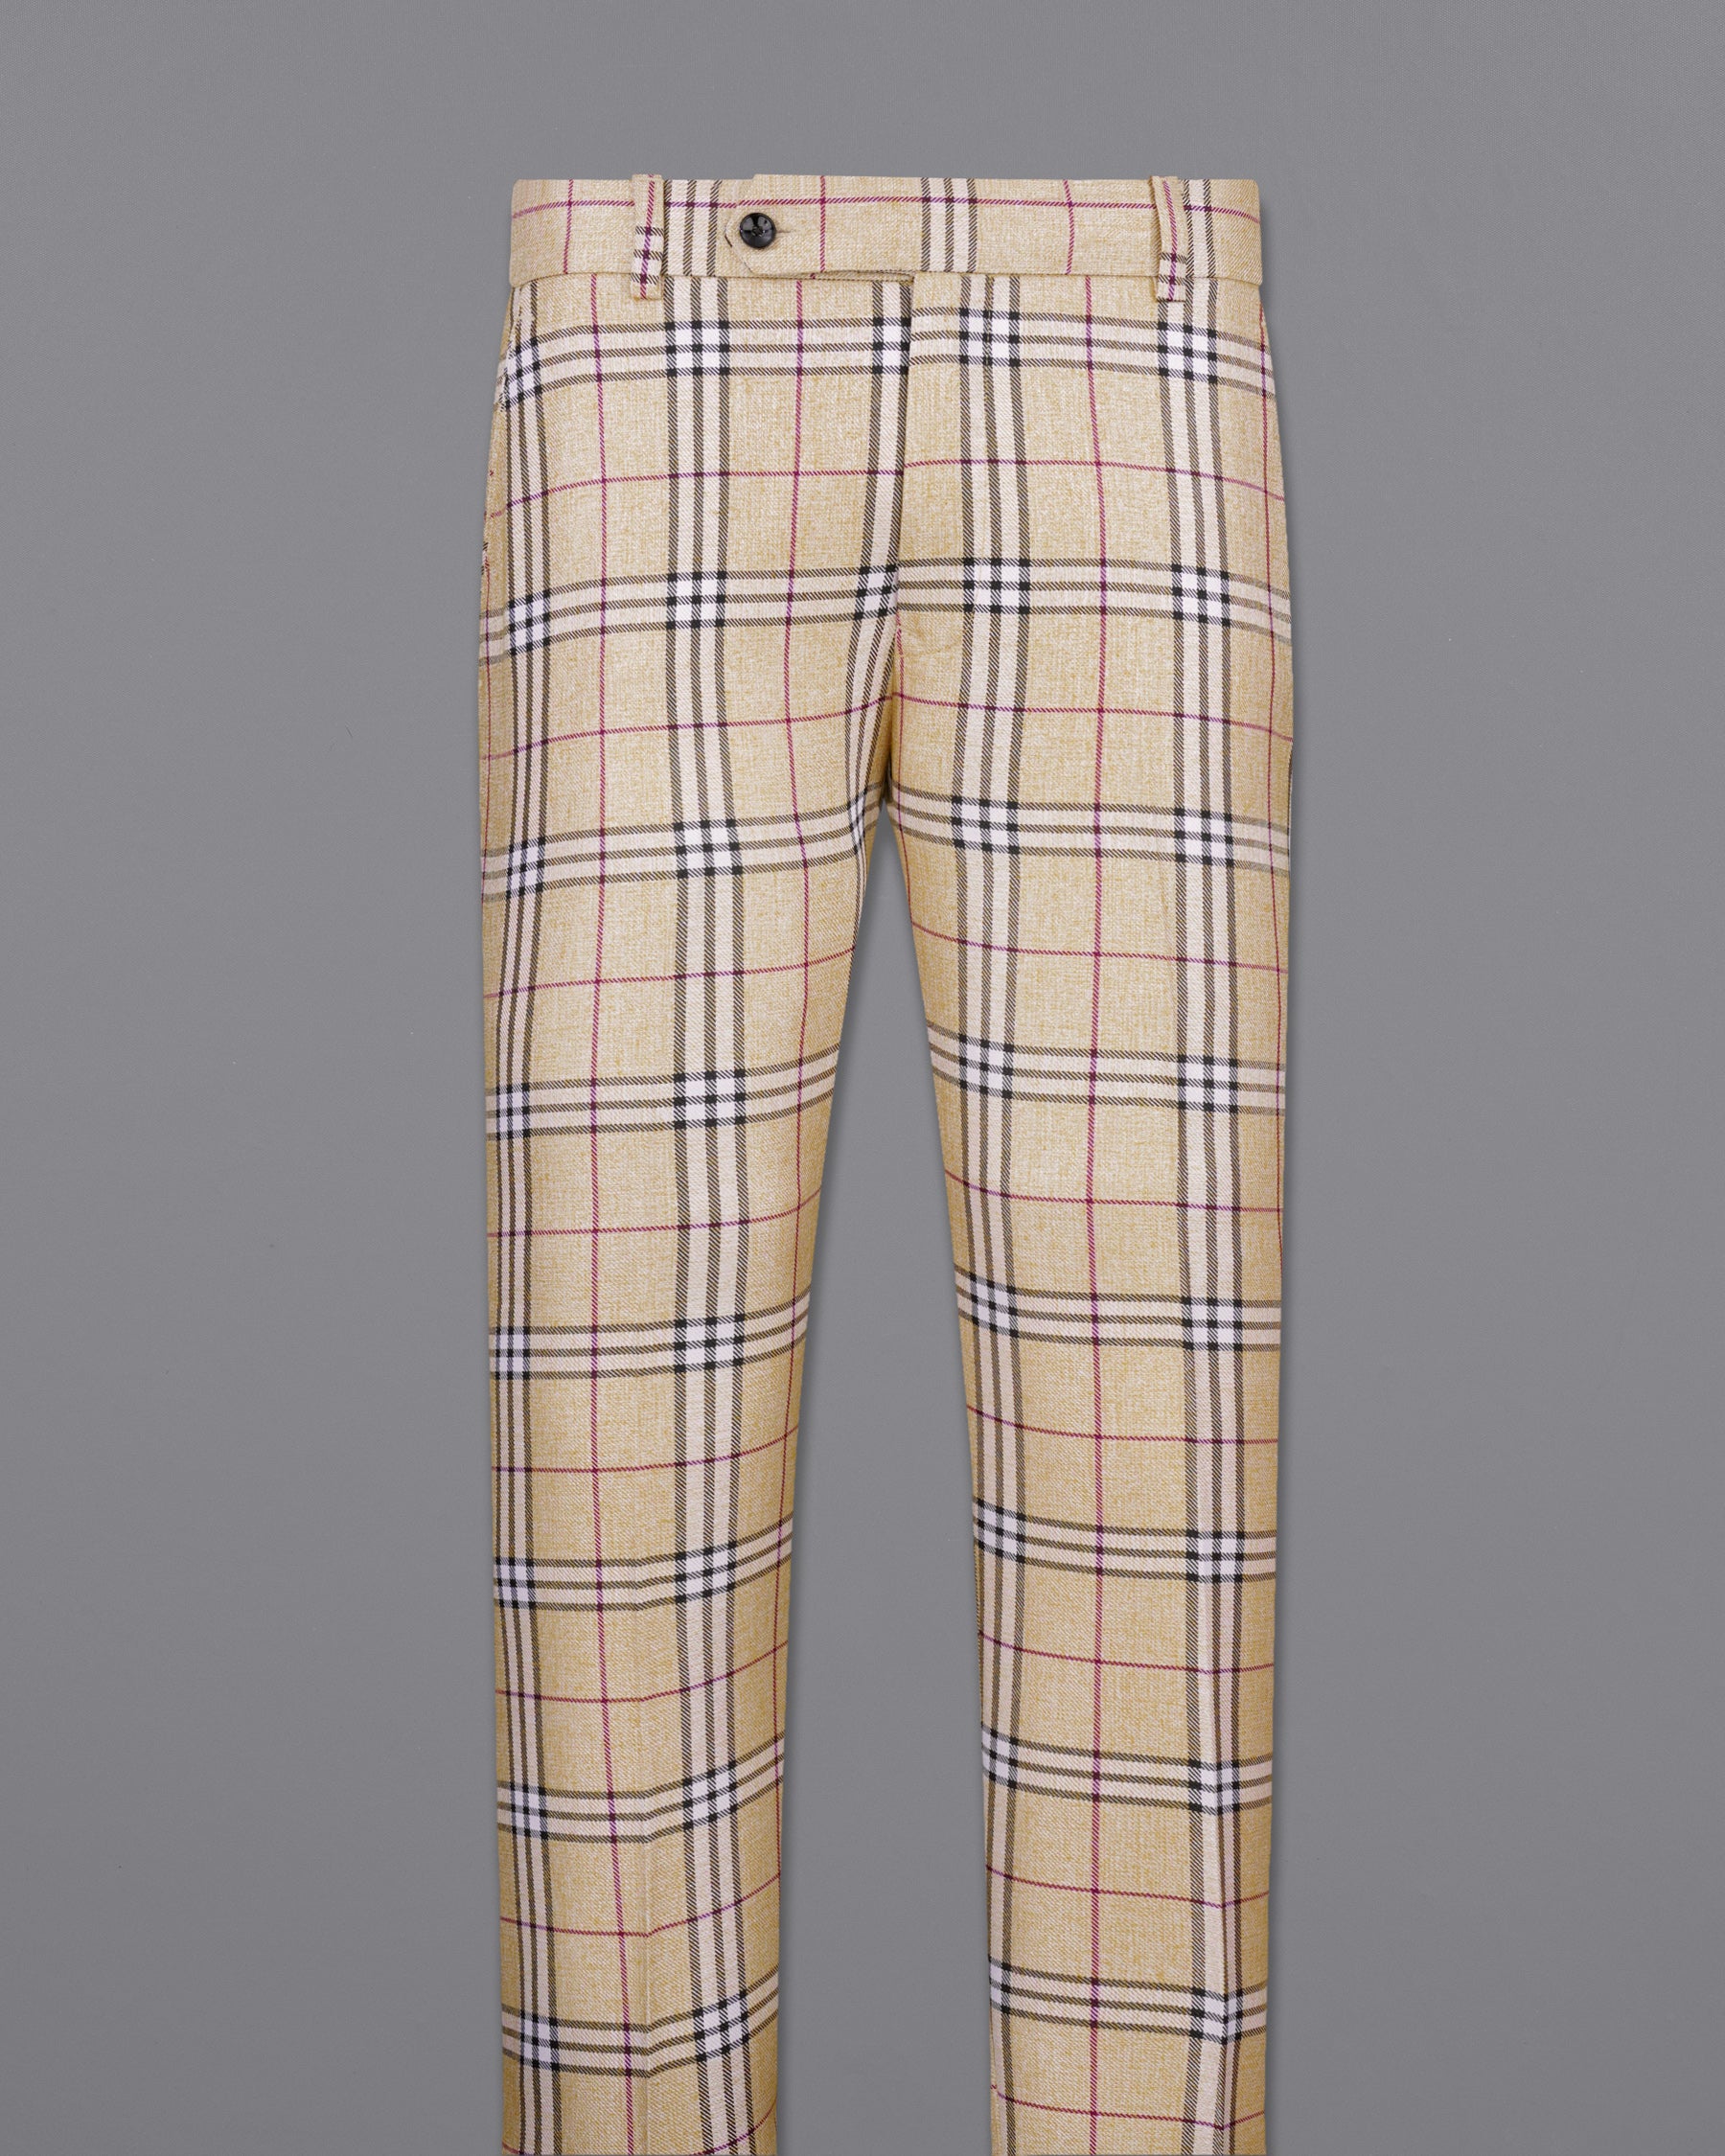 Sorrell Brown with Acadia Black Plaid Pant  T2138-28, T2138-30, T2138-32, T2138-34, T2138-36, T2138-38, T2138-40, T2138-42, T2138-44